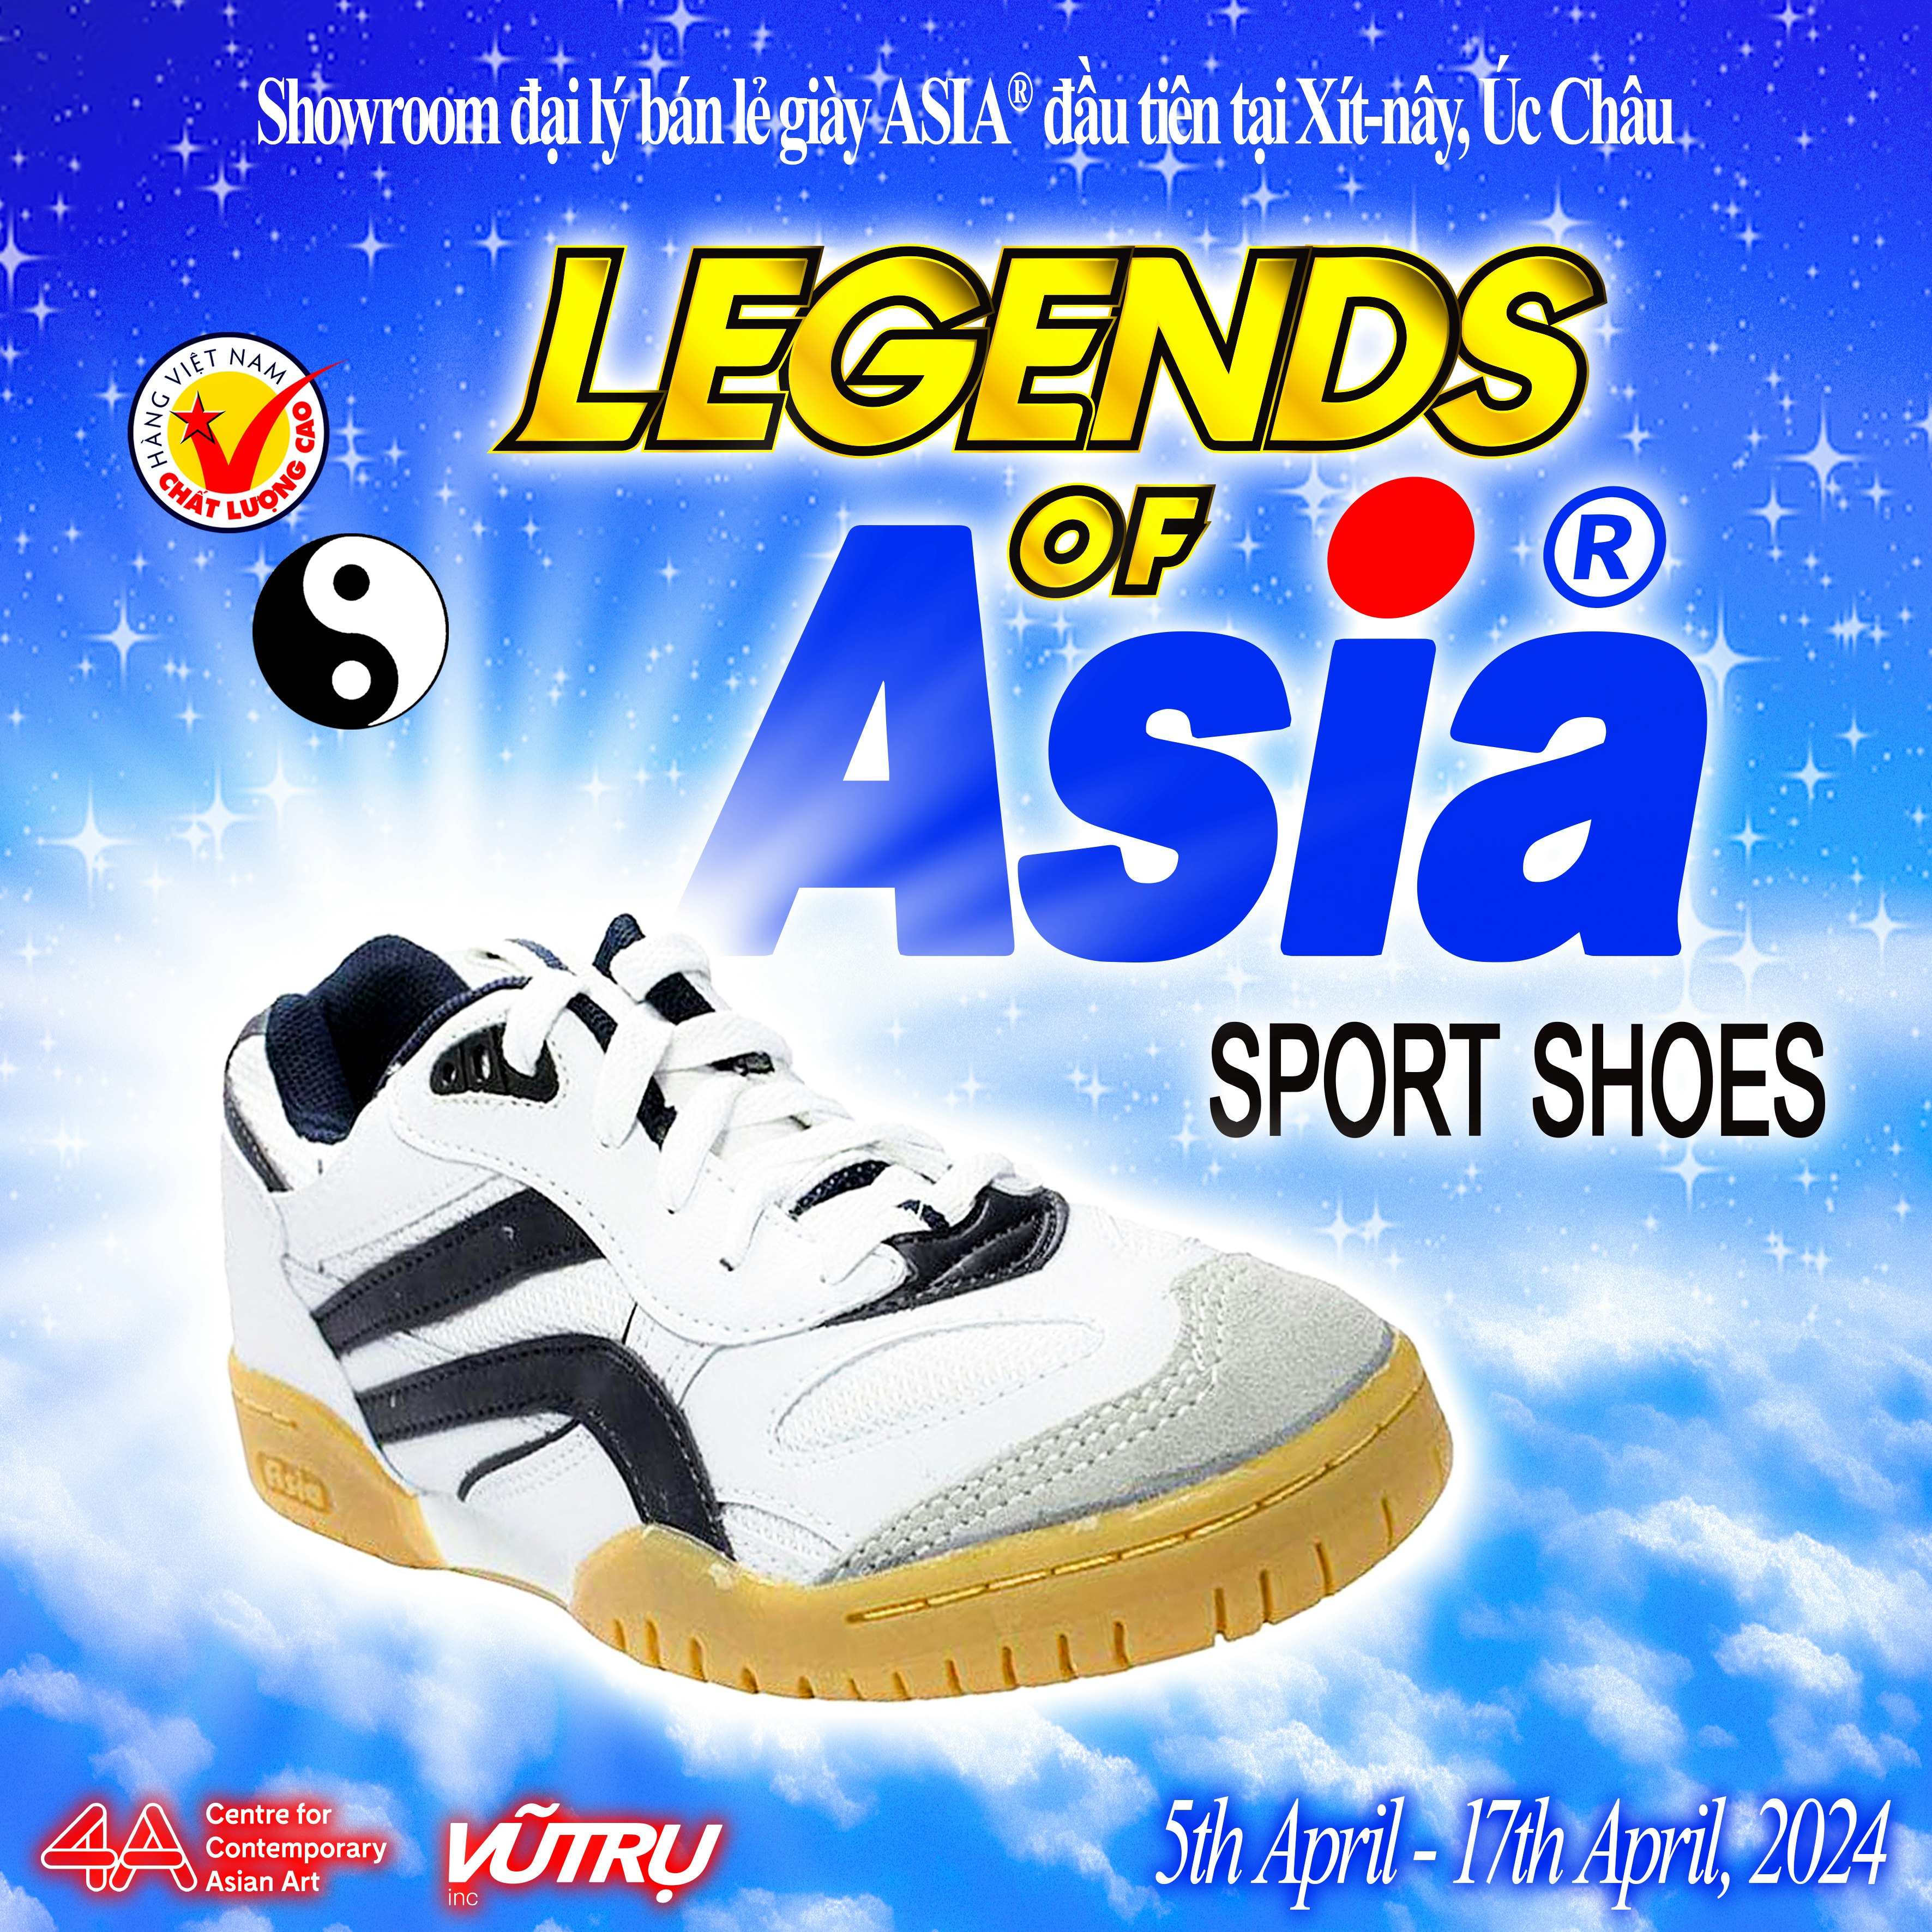 <p><span style="font-weight: 400;">LEGEND OF ASIA&reg; SPORT SHOES</span></p>